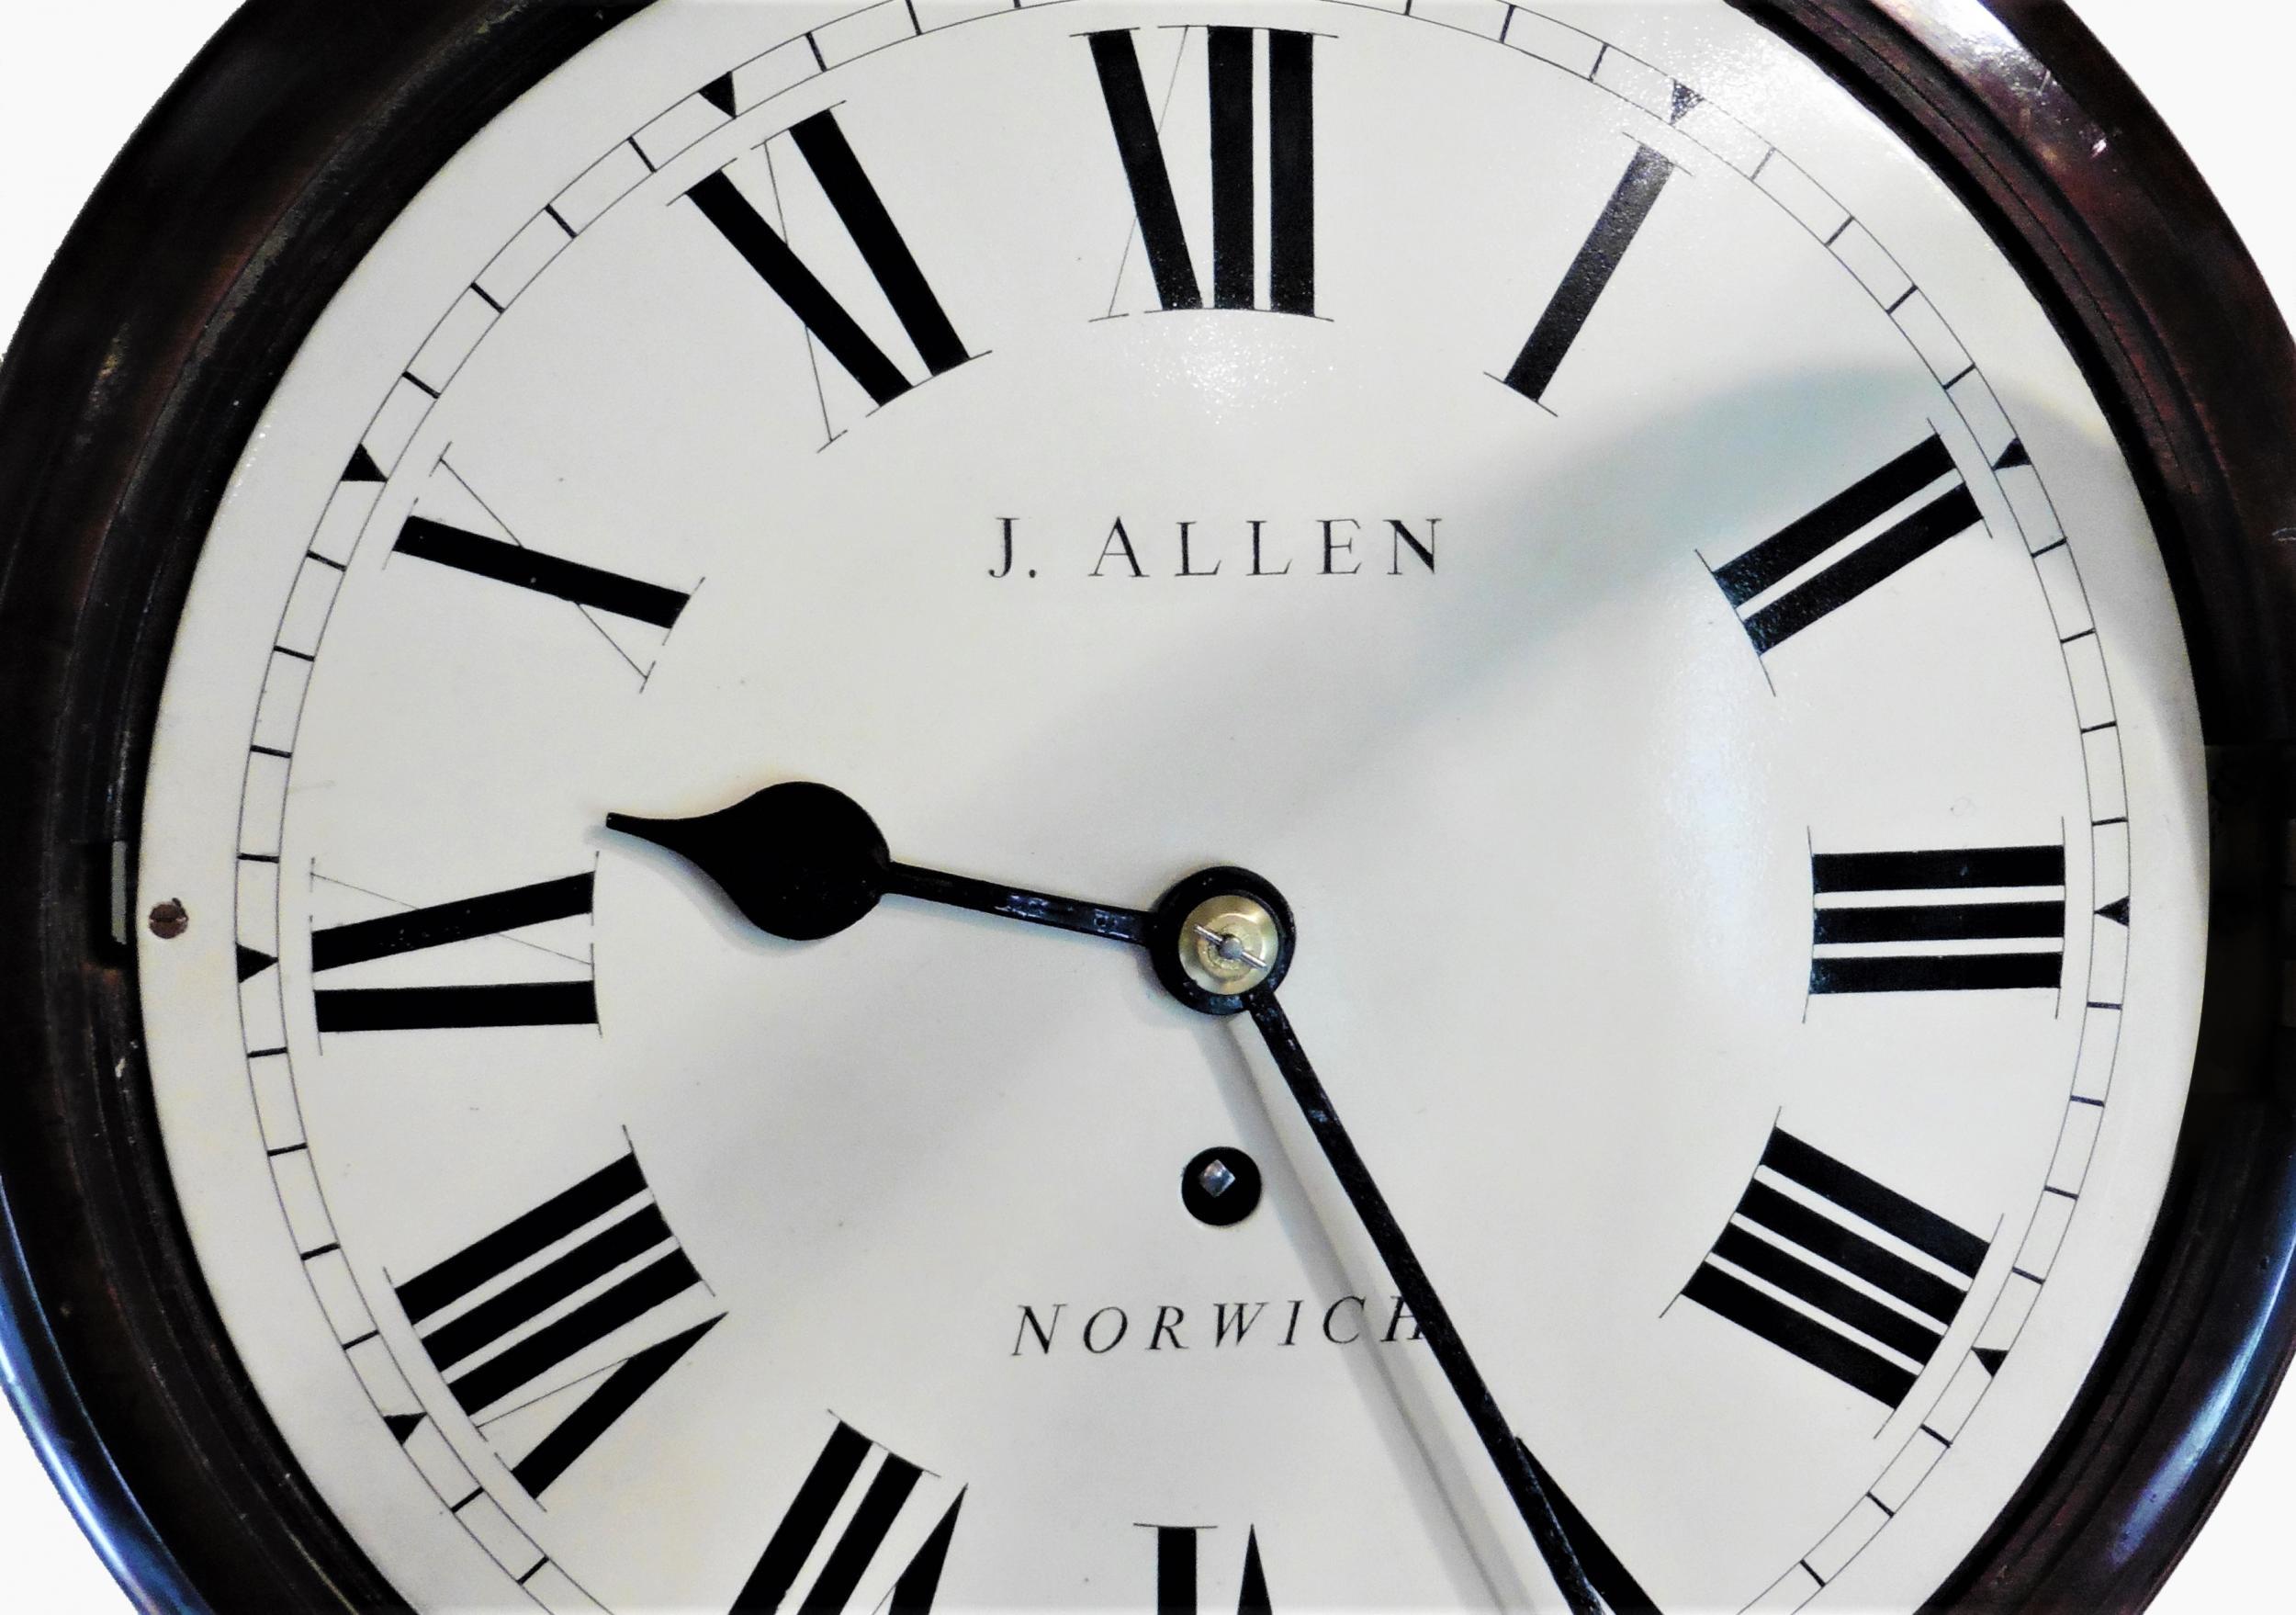 English dial clock by J.Allen, Norwich


Mahogany round dial wall clock with brass bezel, inspection door to the side and bottom door to allow access for the pendulum.

Nine and three quarter in painted dial with Roman numerals, original steel hands